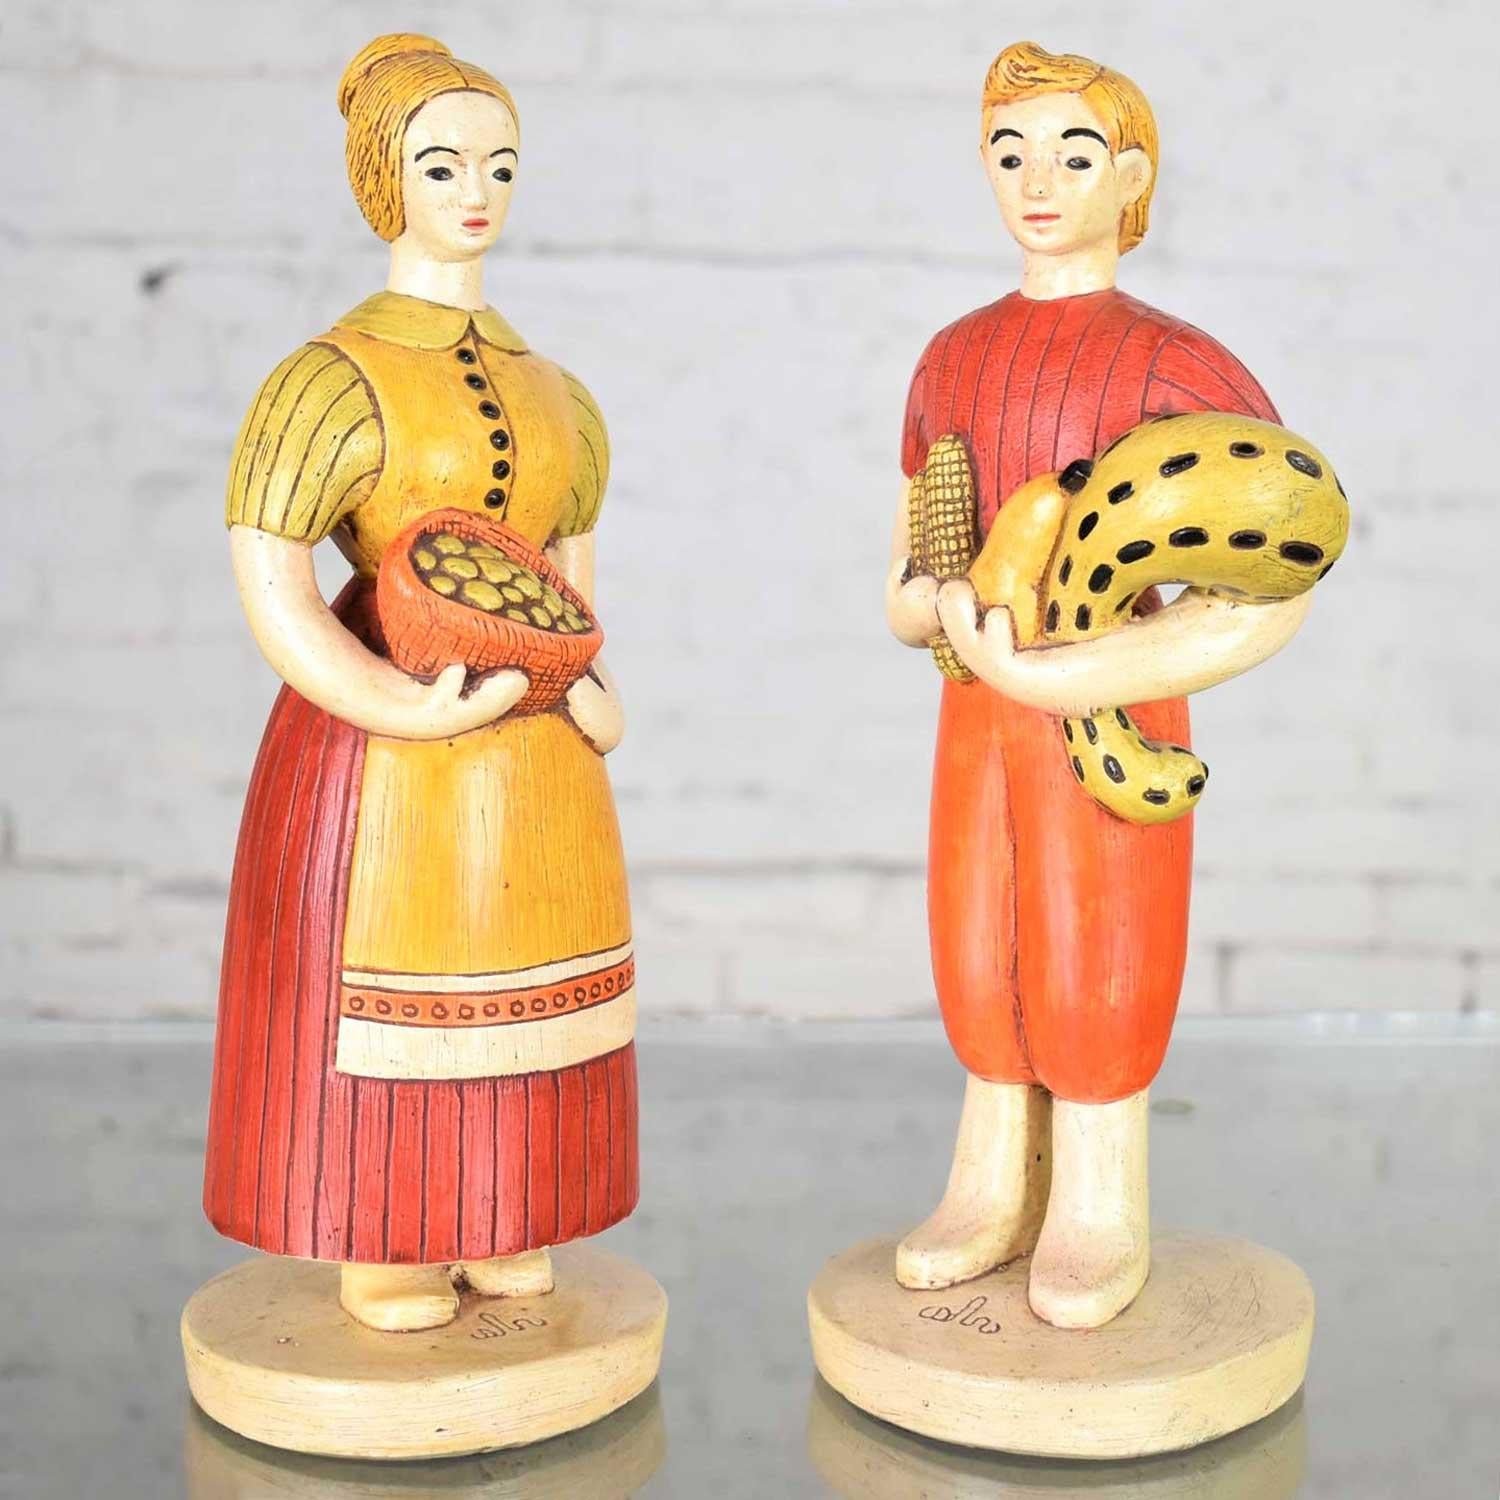 Sylvia Hood original vintage harvest couple chalkware figurines one man and one woman. These Iconic figurines bear her logo indicating their rare authenticity. They are comprised of Extone (a material much like chalkware, invented by her husband